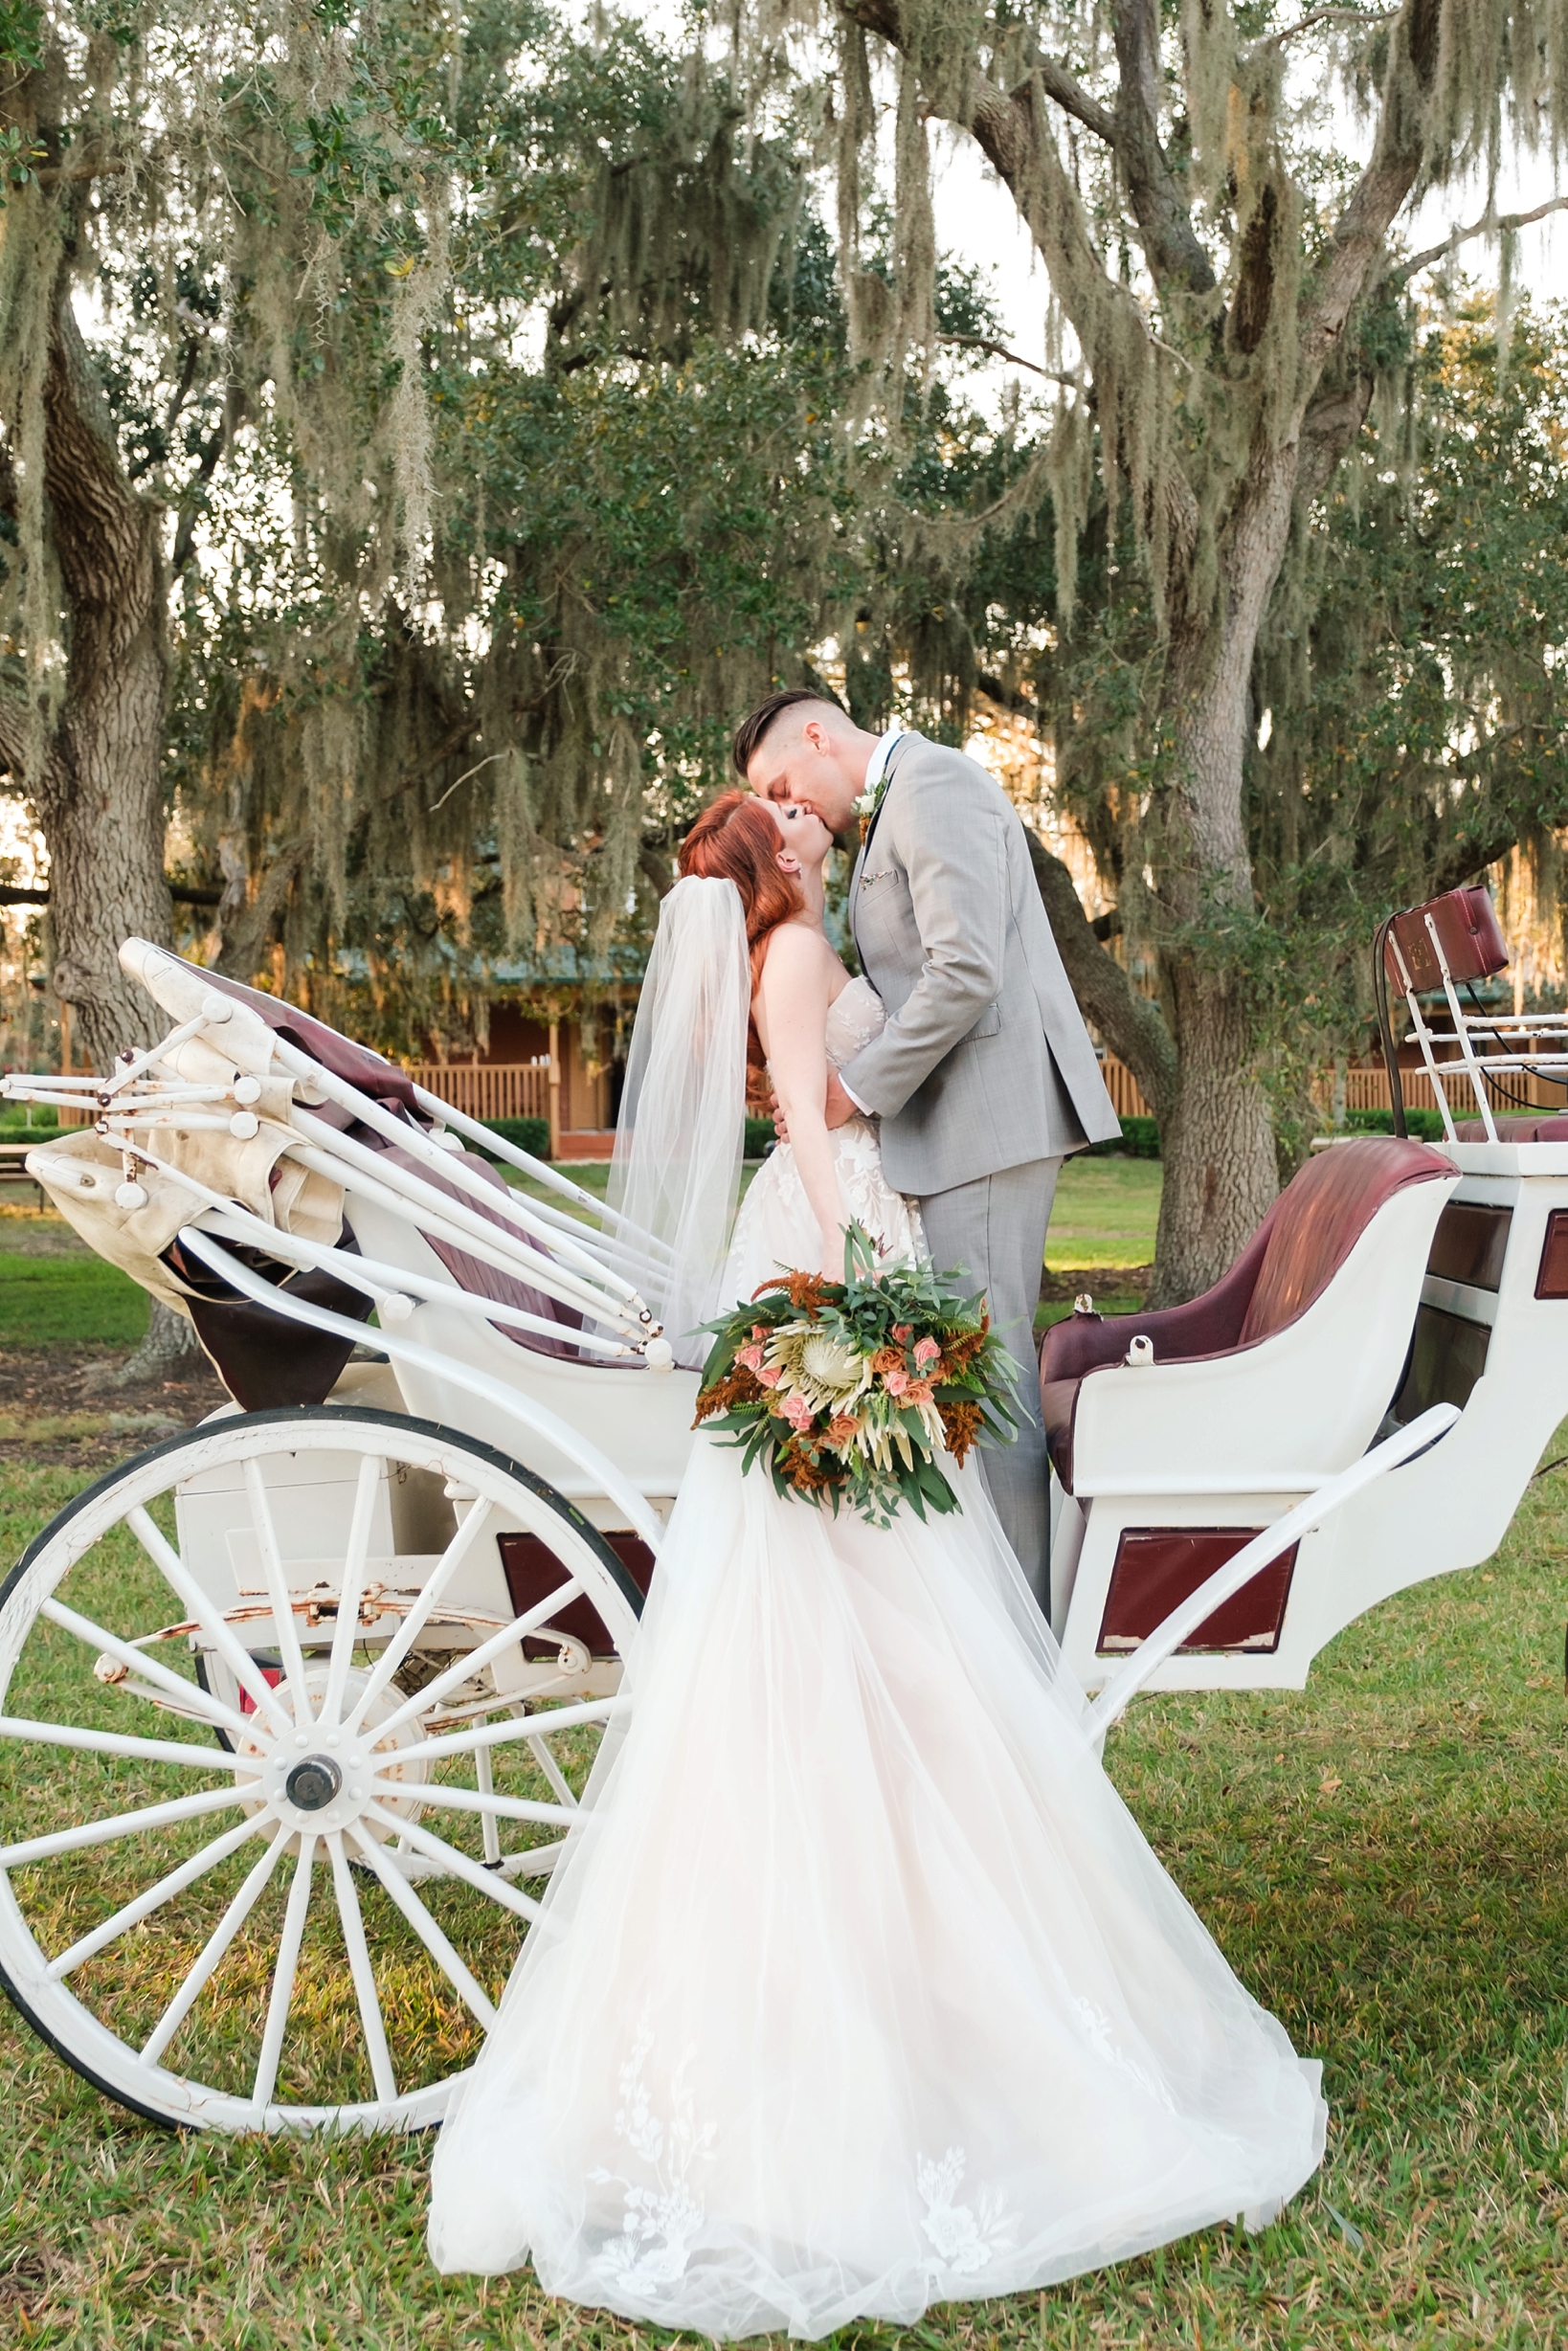 Bride and Groom share a passionate kiss on the horse drawn carriage